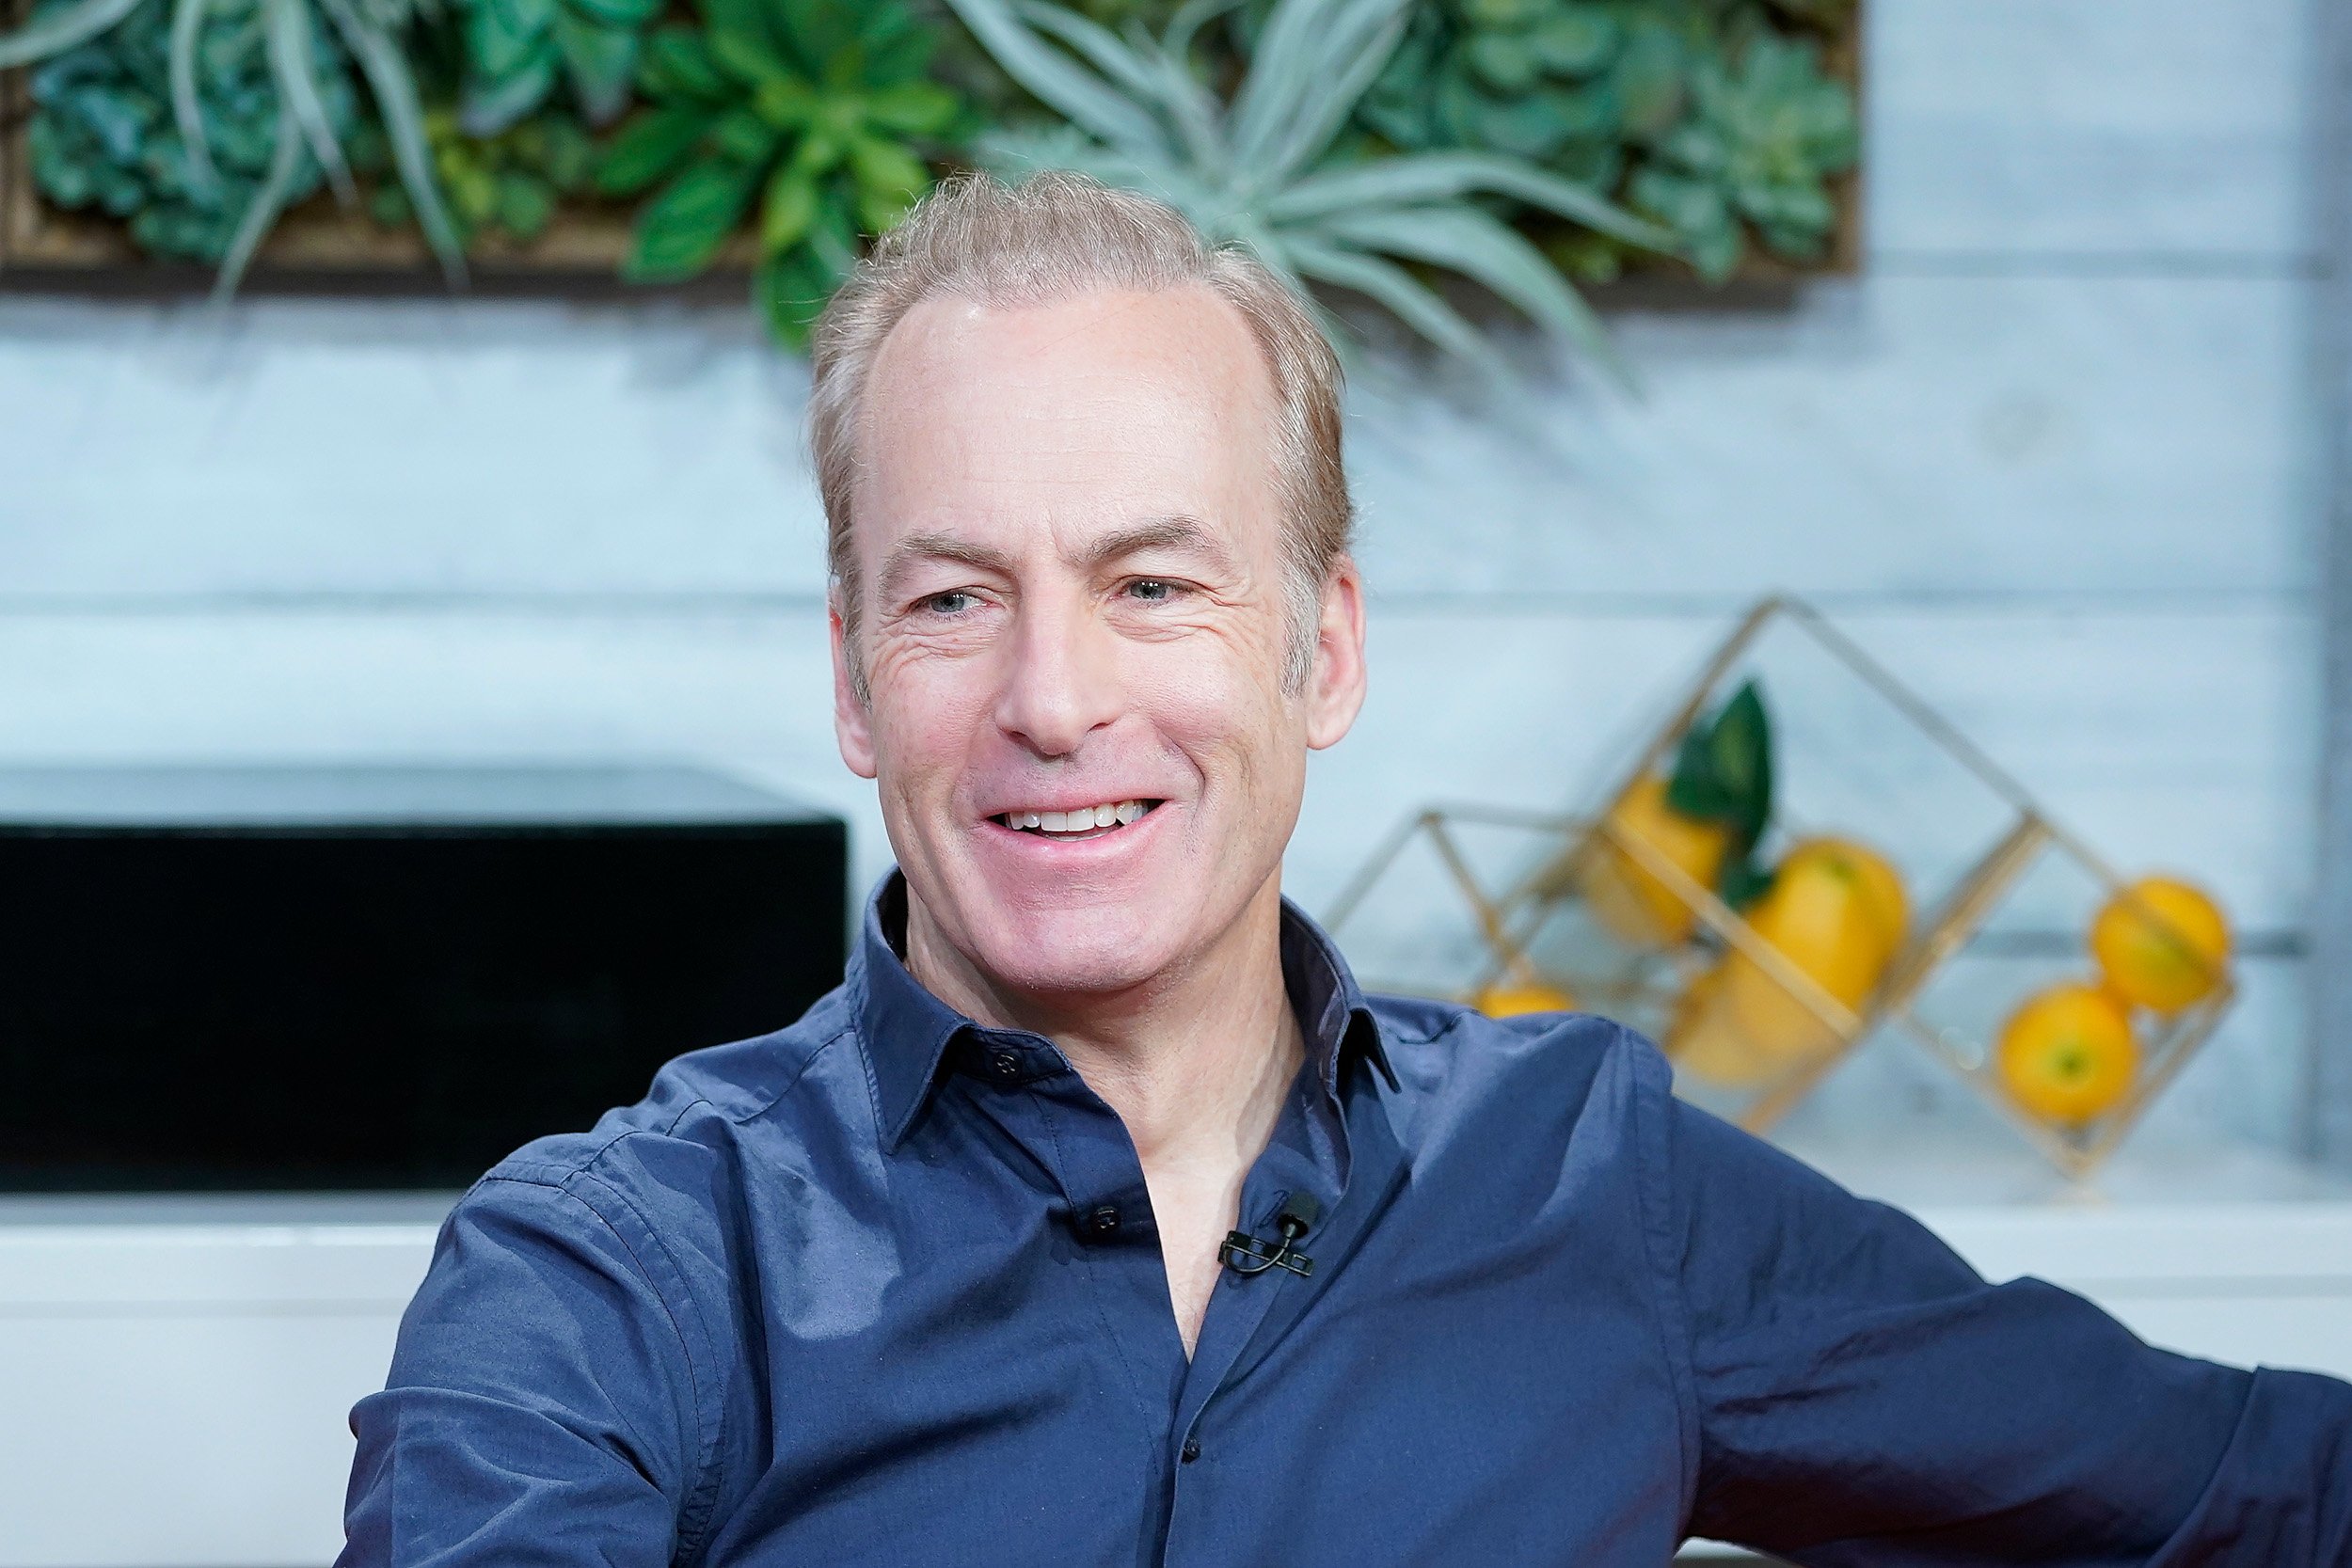 Bob Odenkirk wearing a blue button-up shirt and smiling